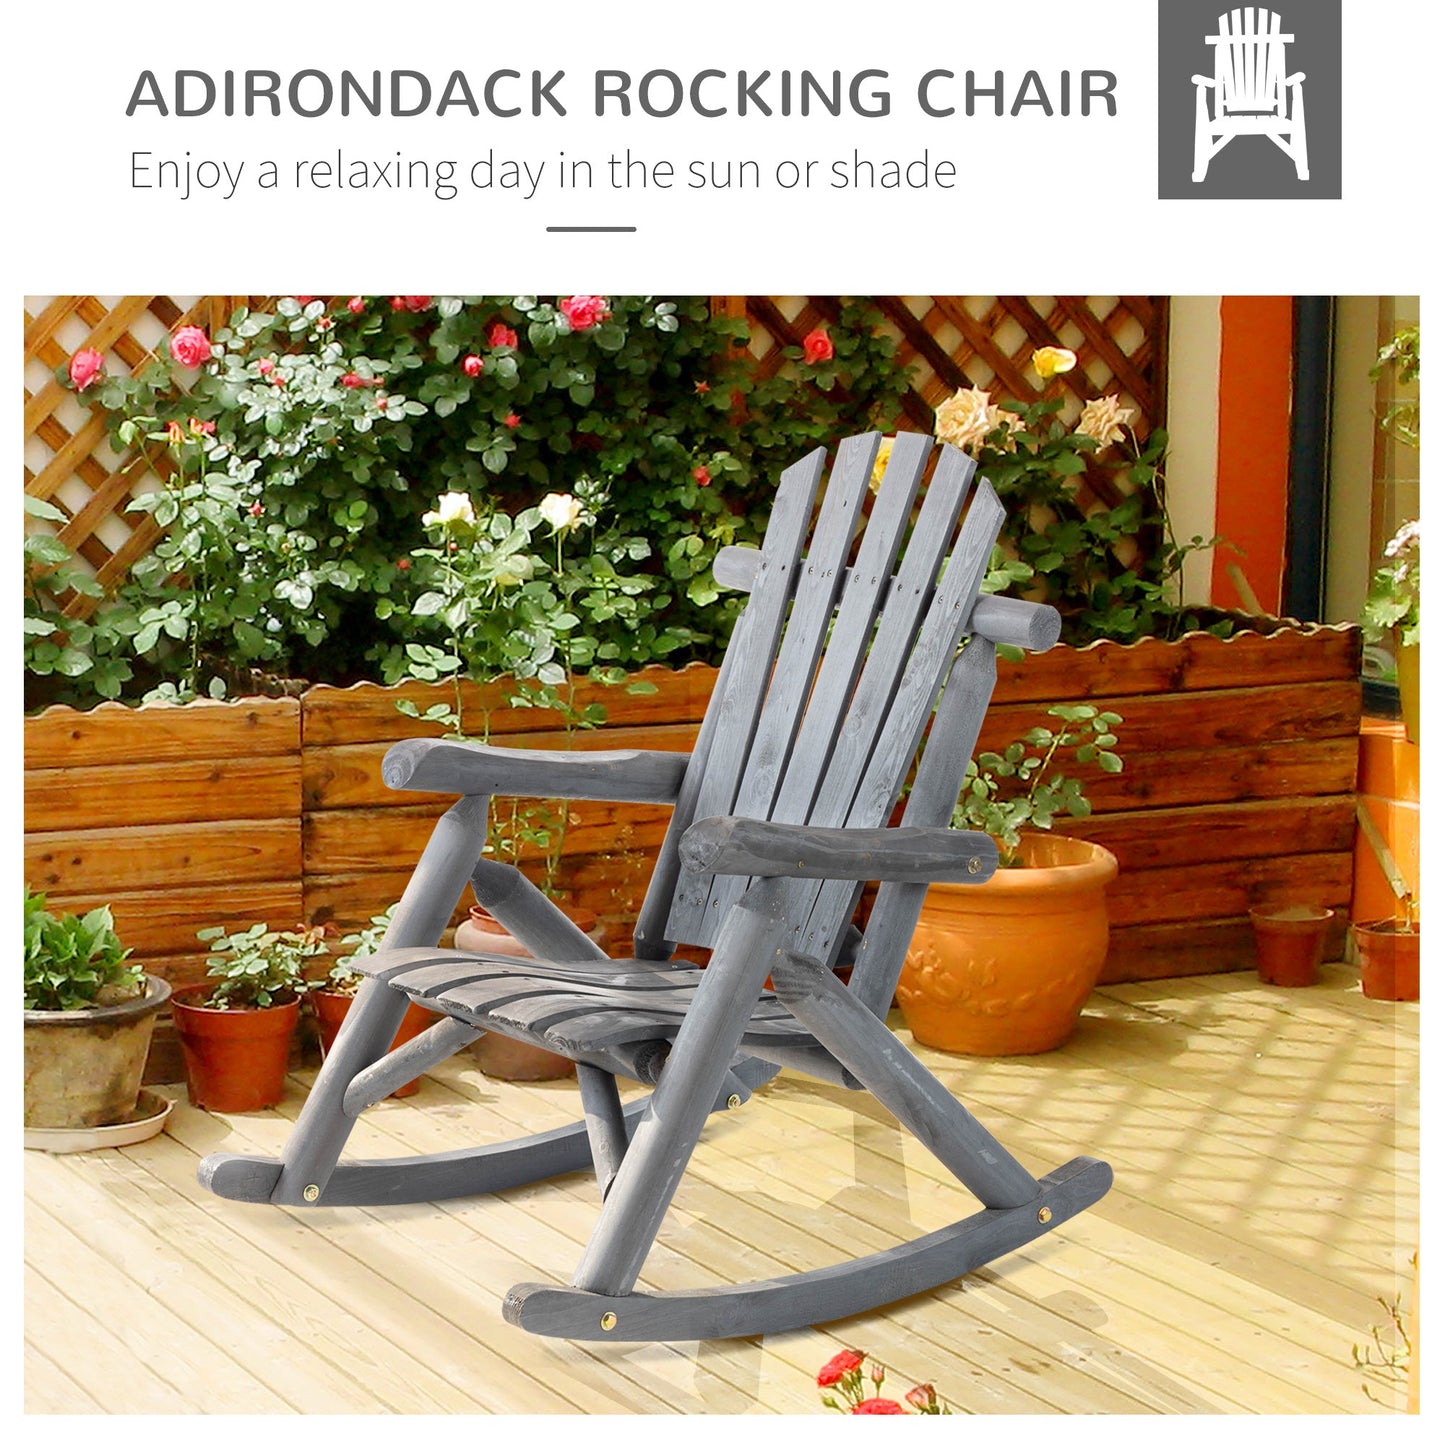 Outdoor and Garden-Wooden Adirondack Rocking Chair, Outdoor Rustic Log Rocker with Slatted Design for Patio, Dark Grey - Outdoor Style Company